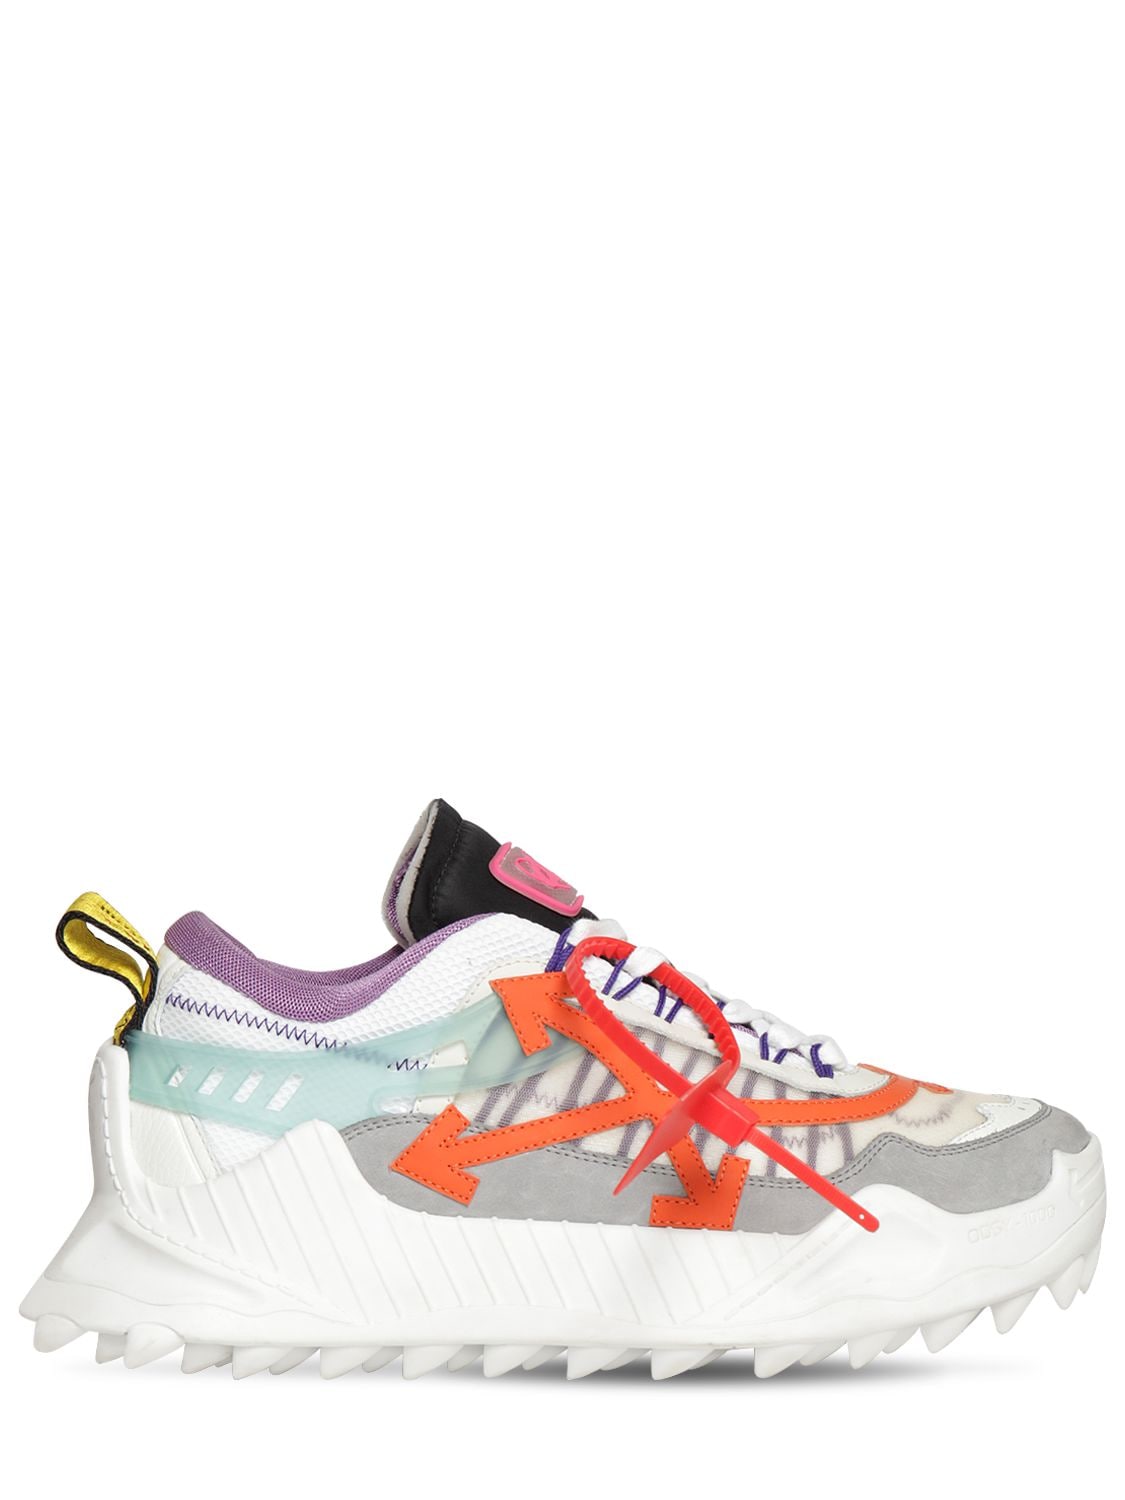 OFF-WHITE ODSY CHUNKY TECH LOW-TOP trainers,71IJSY010-MDEXOQ2